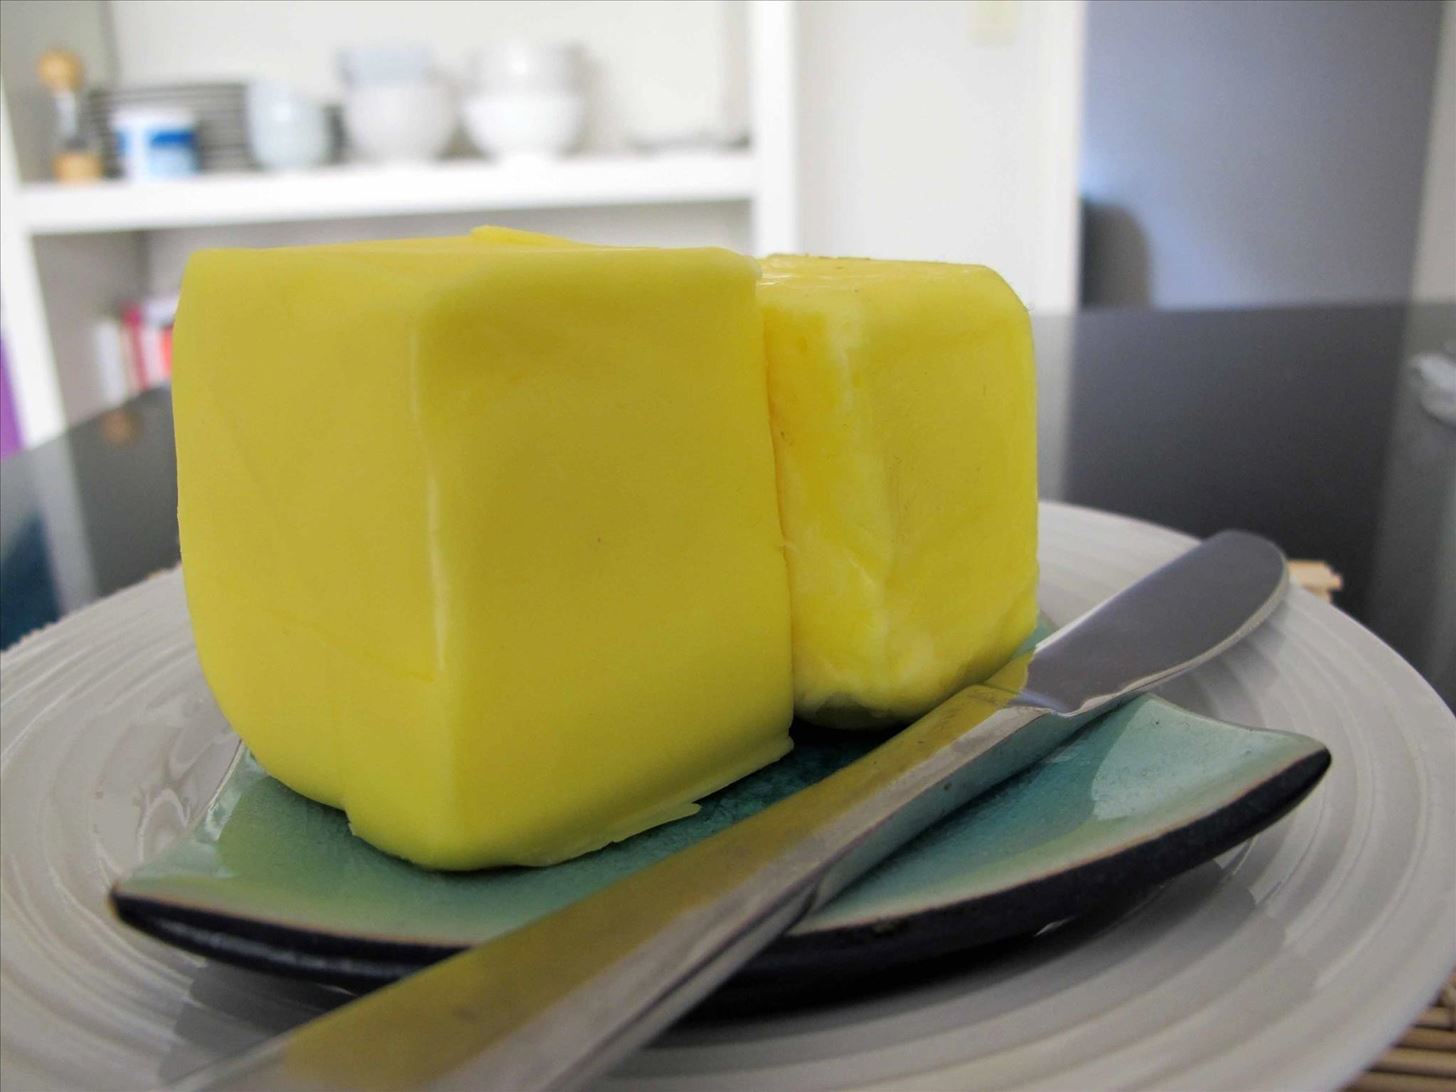 Ingredients 101: How & Why You Should Clarify Butter